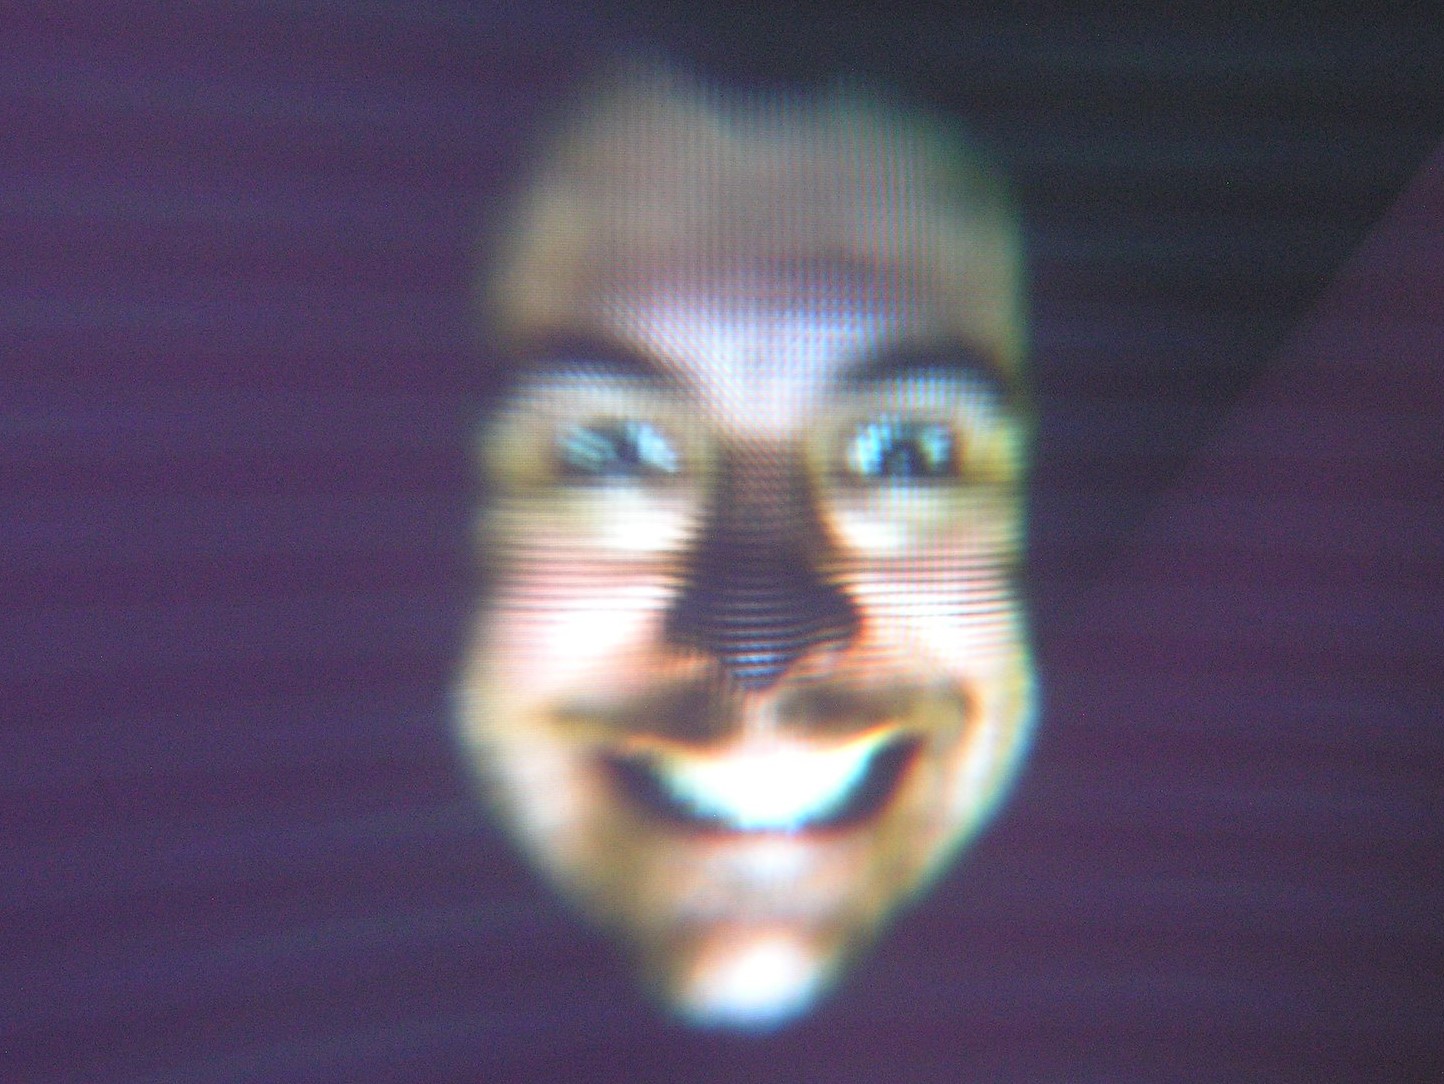 computer image of a 3D face scan